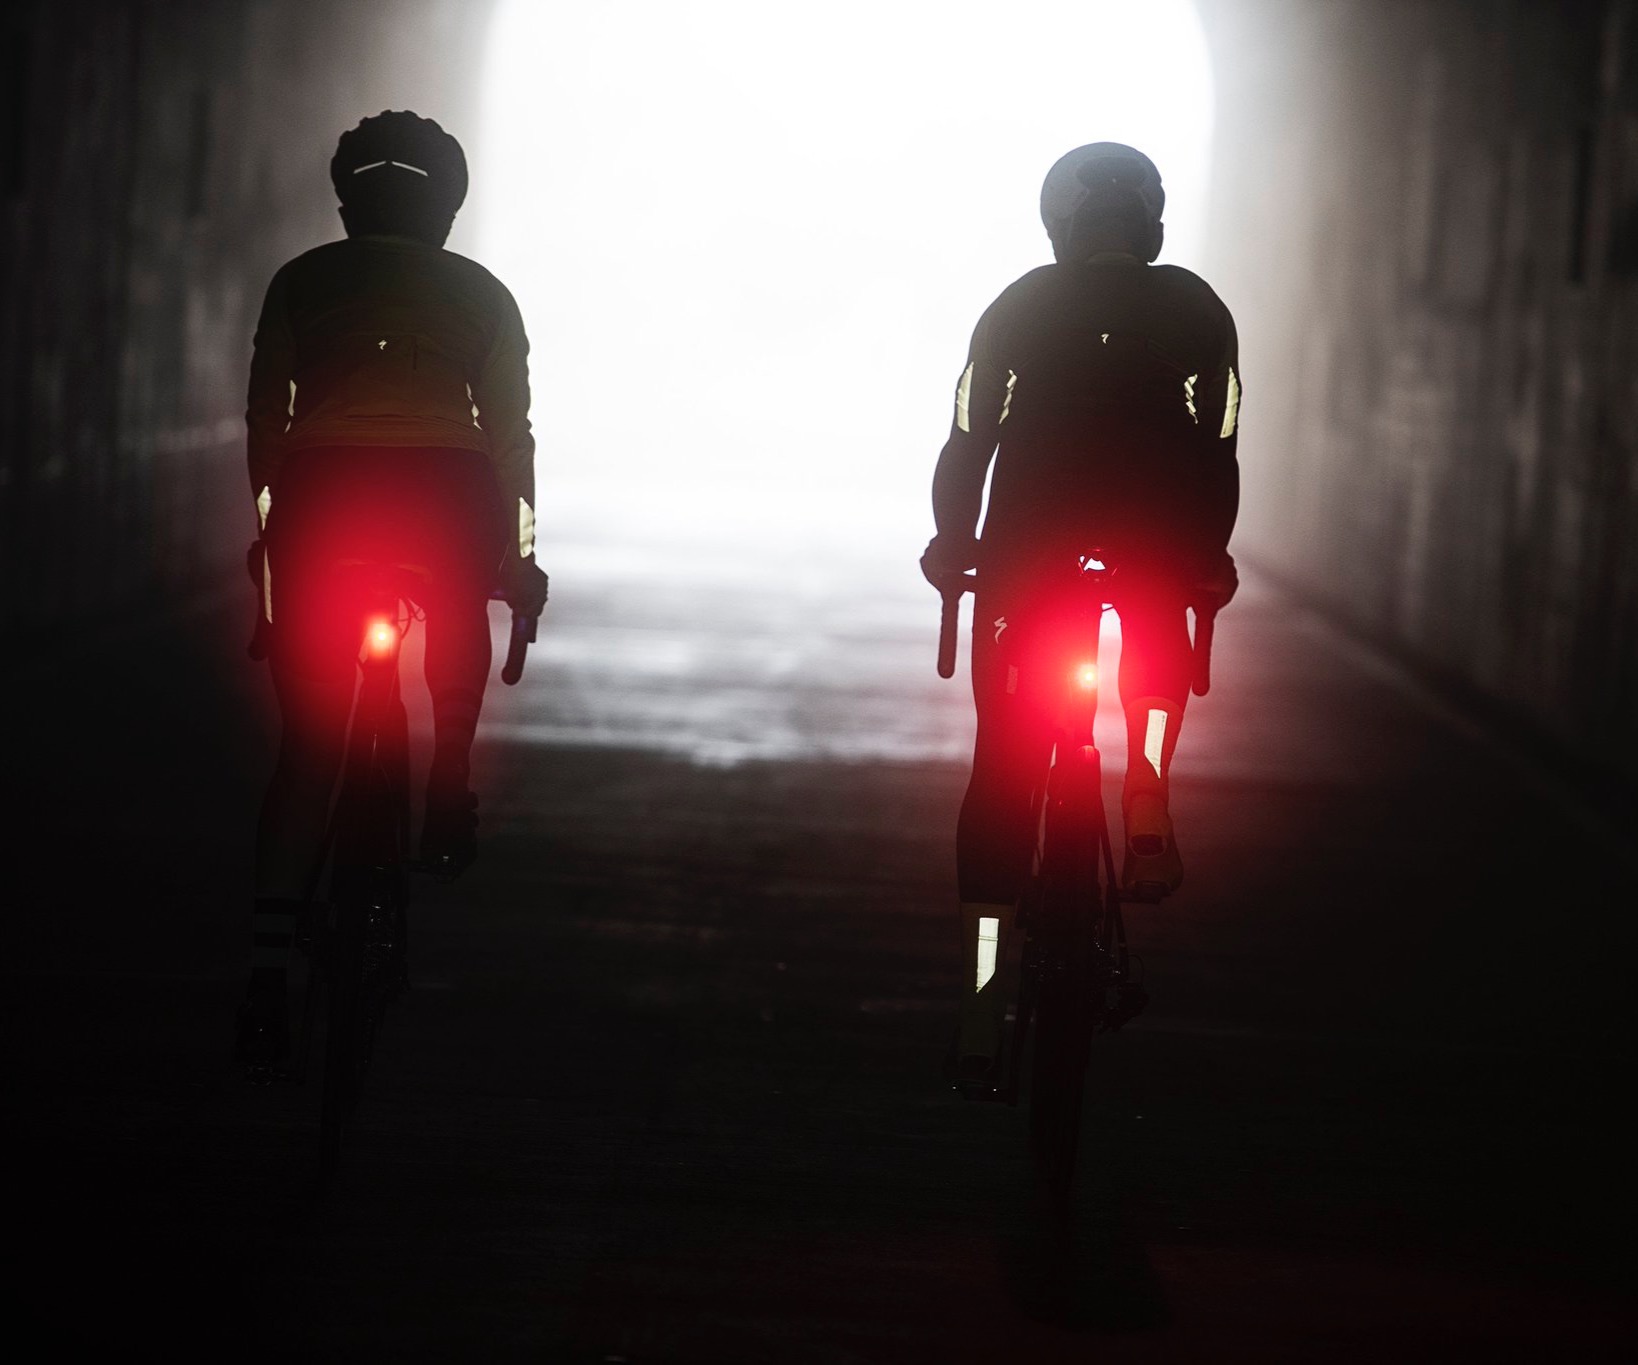 Bikes with lights in the dark.